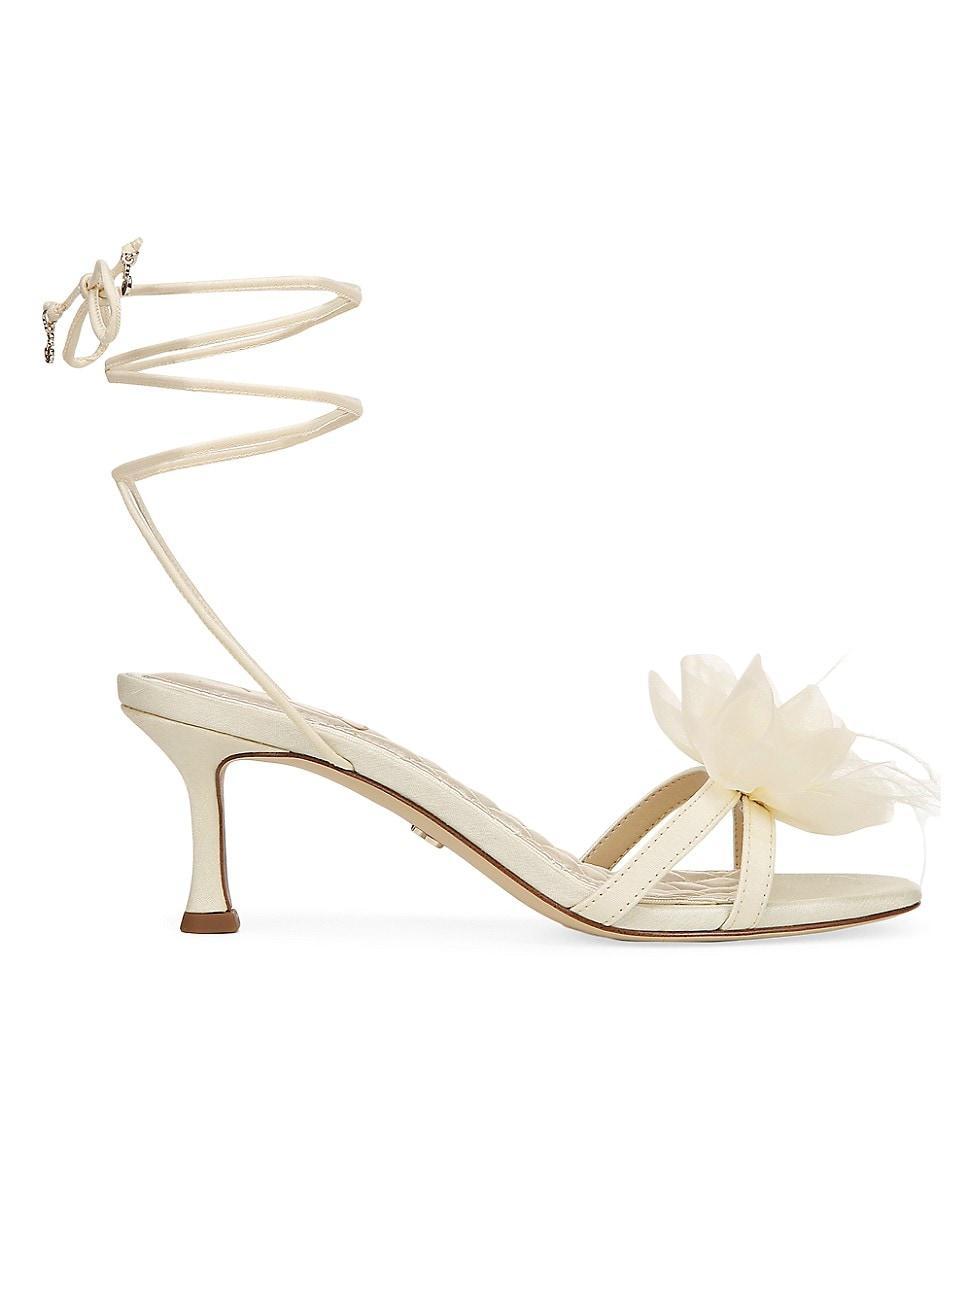 Sam Edelman Pammie (Pearl Ivory) Women's Shoes Product Image